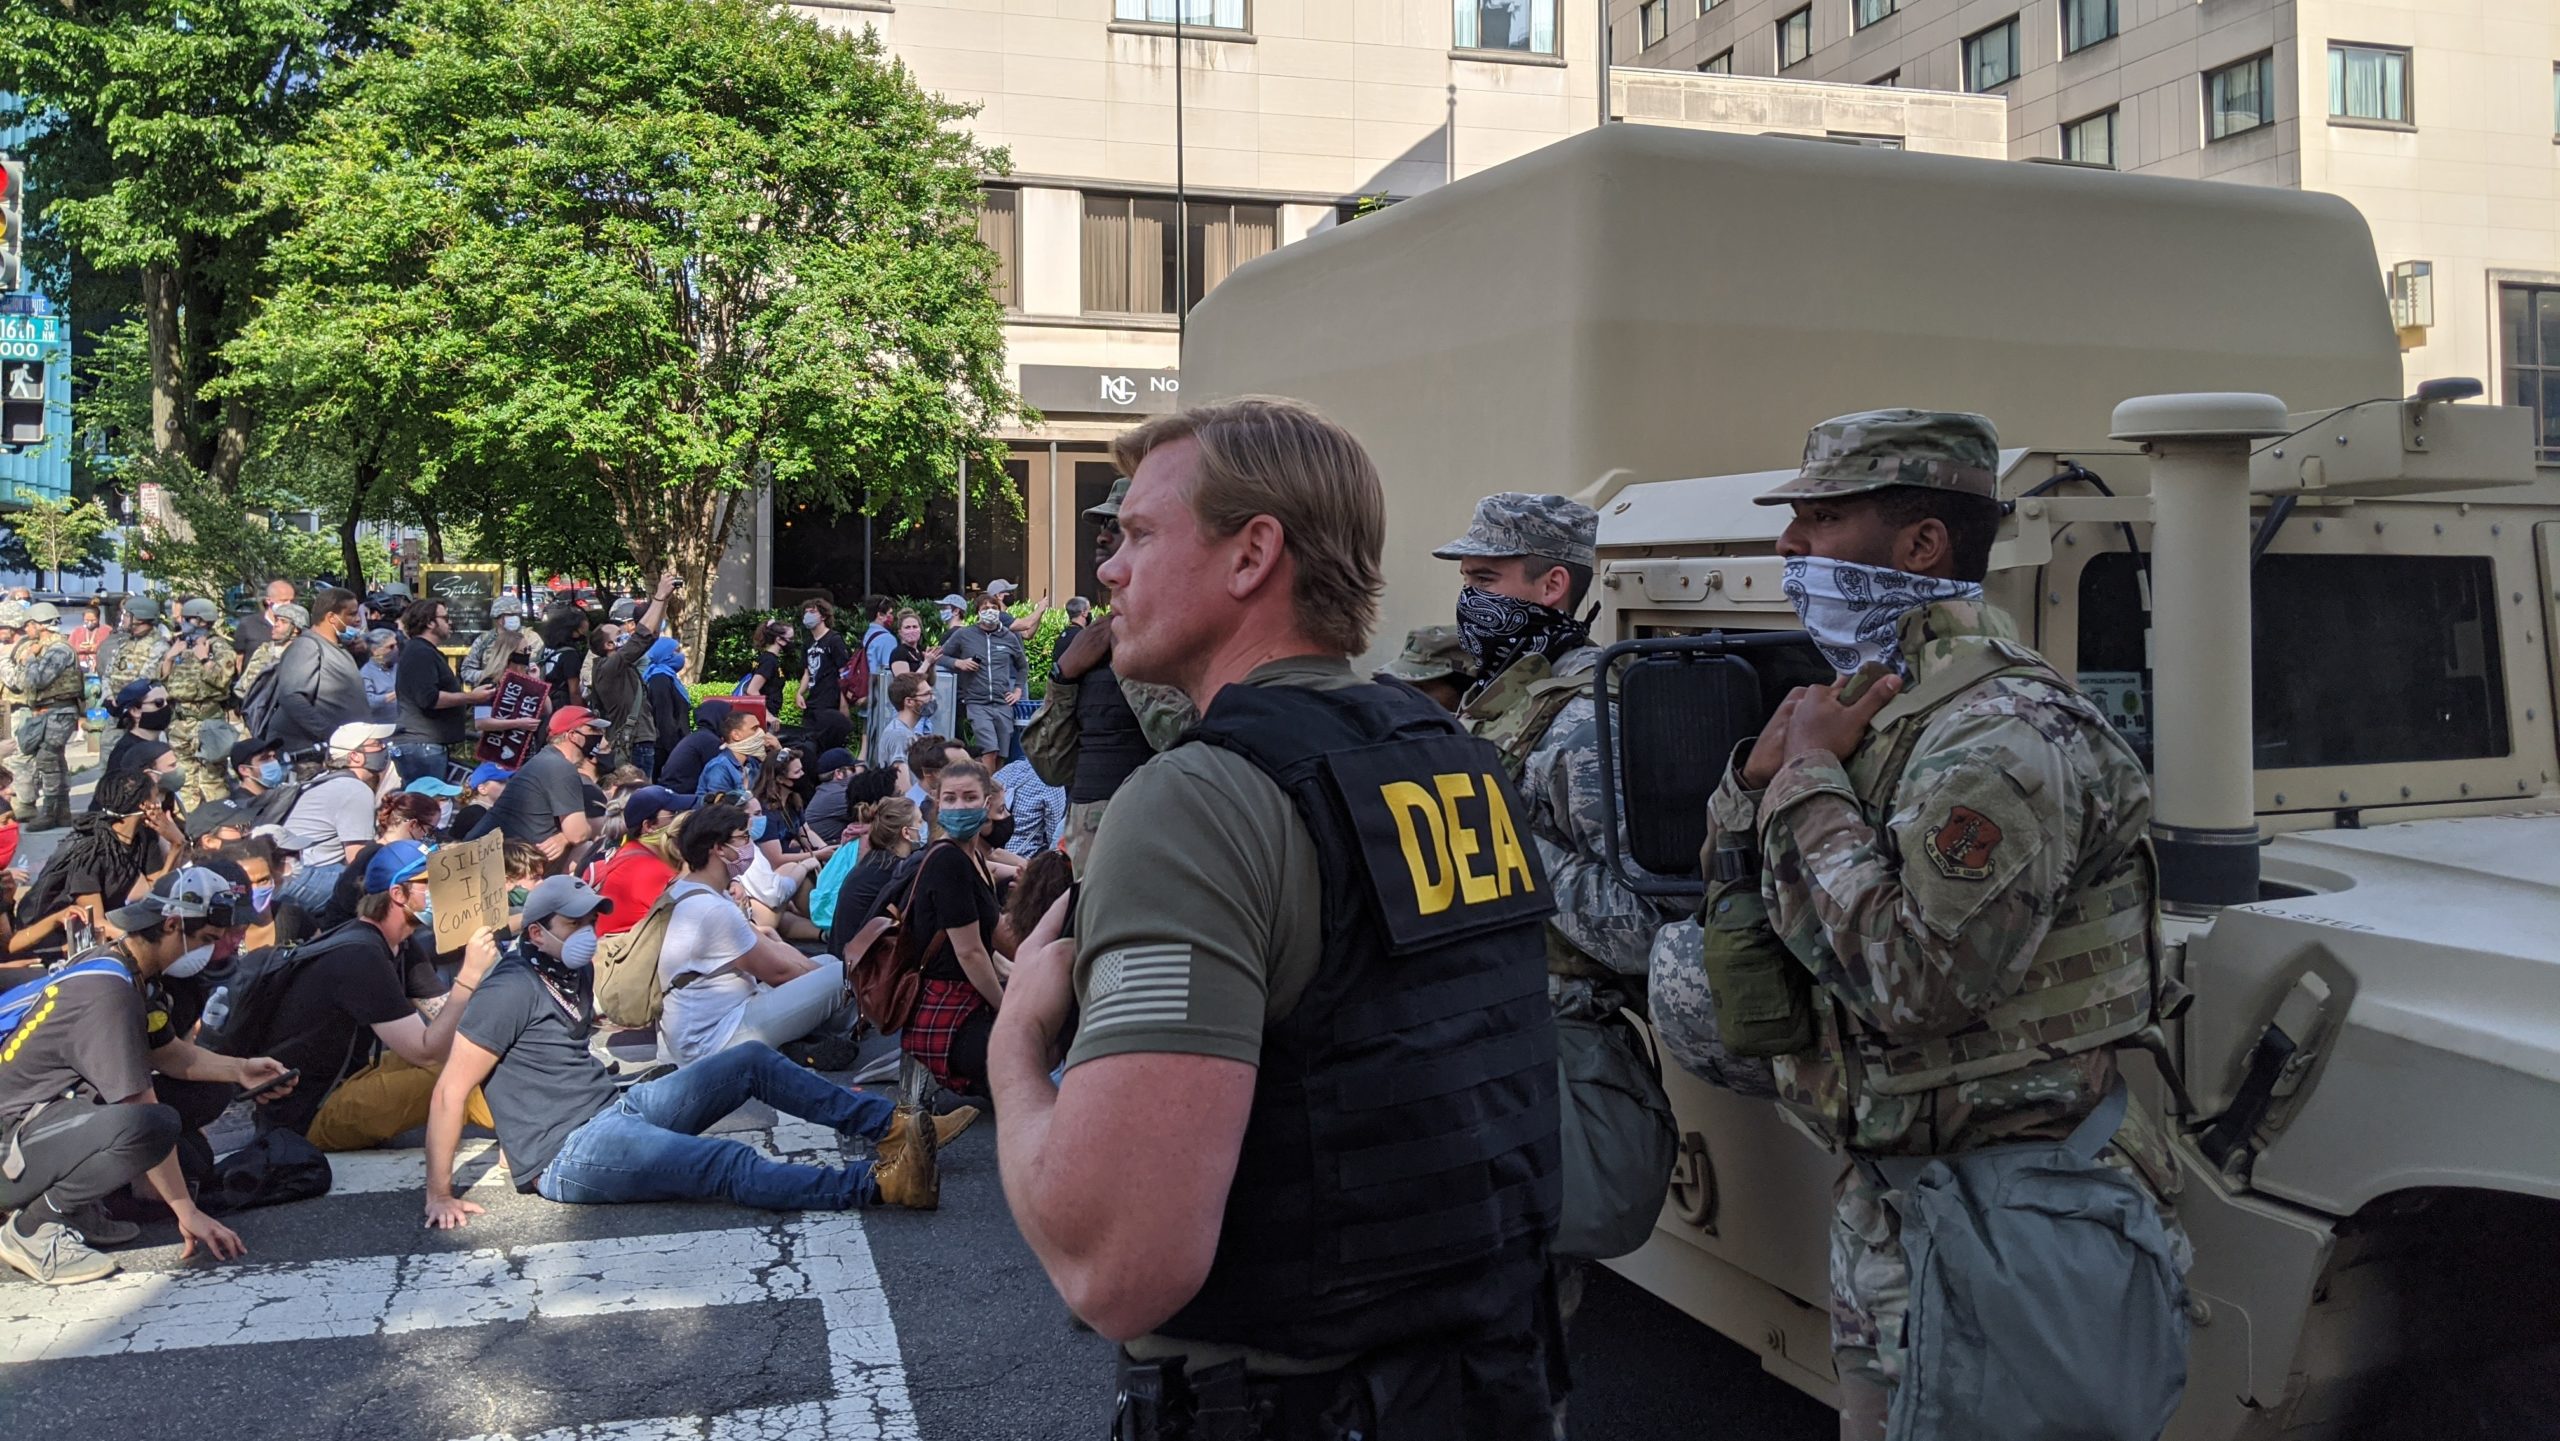 A DEA agent confers with several soldiers as protesters march to the White House on June 2. (Photo: Tom McKay, Gizmodo)